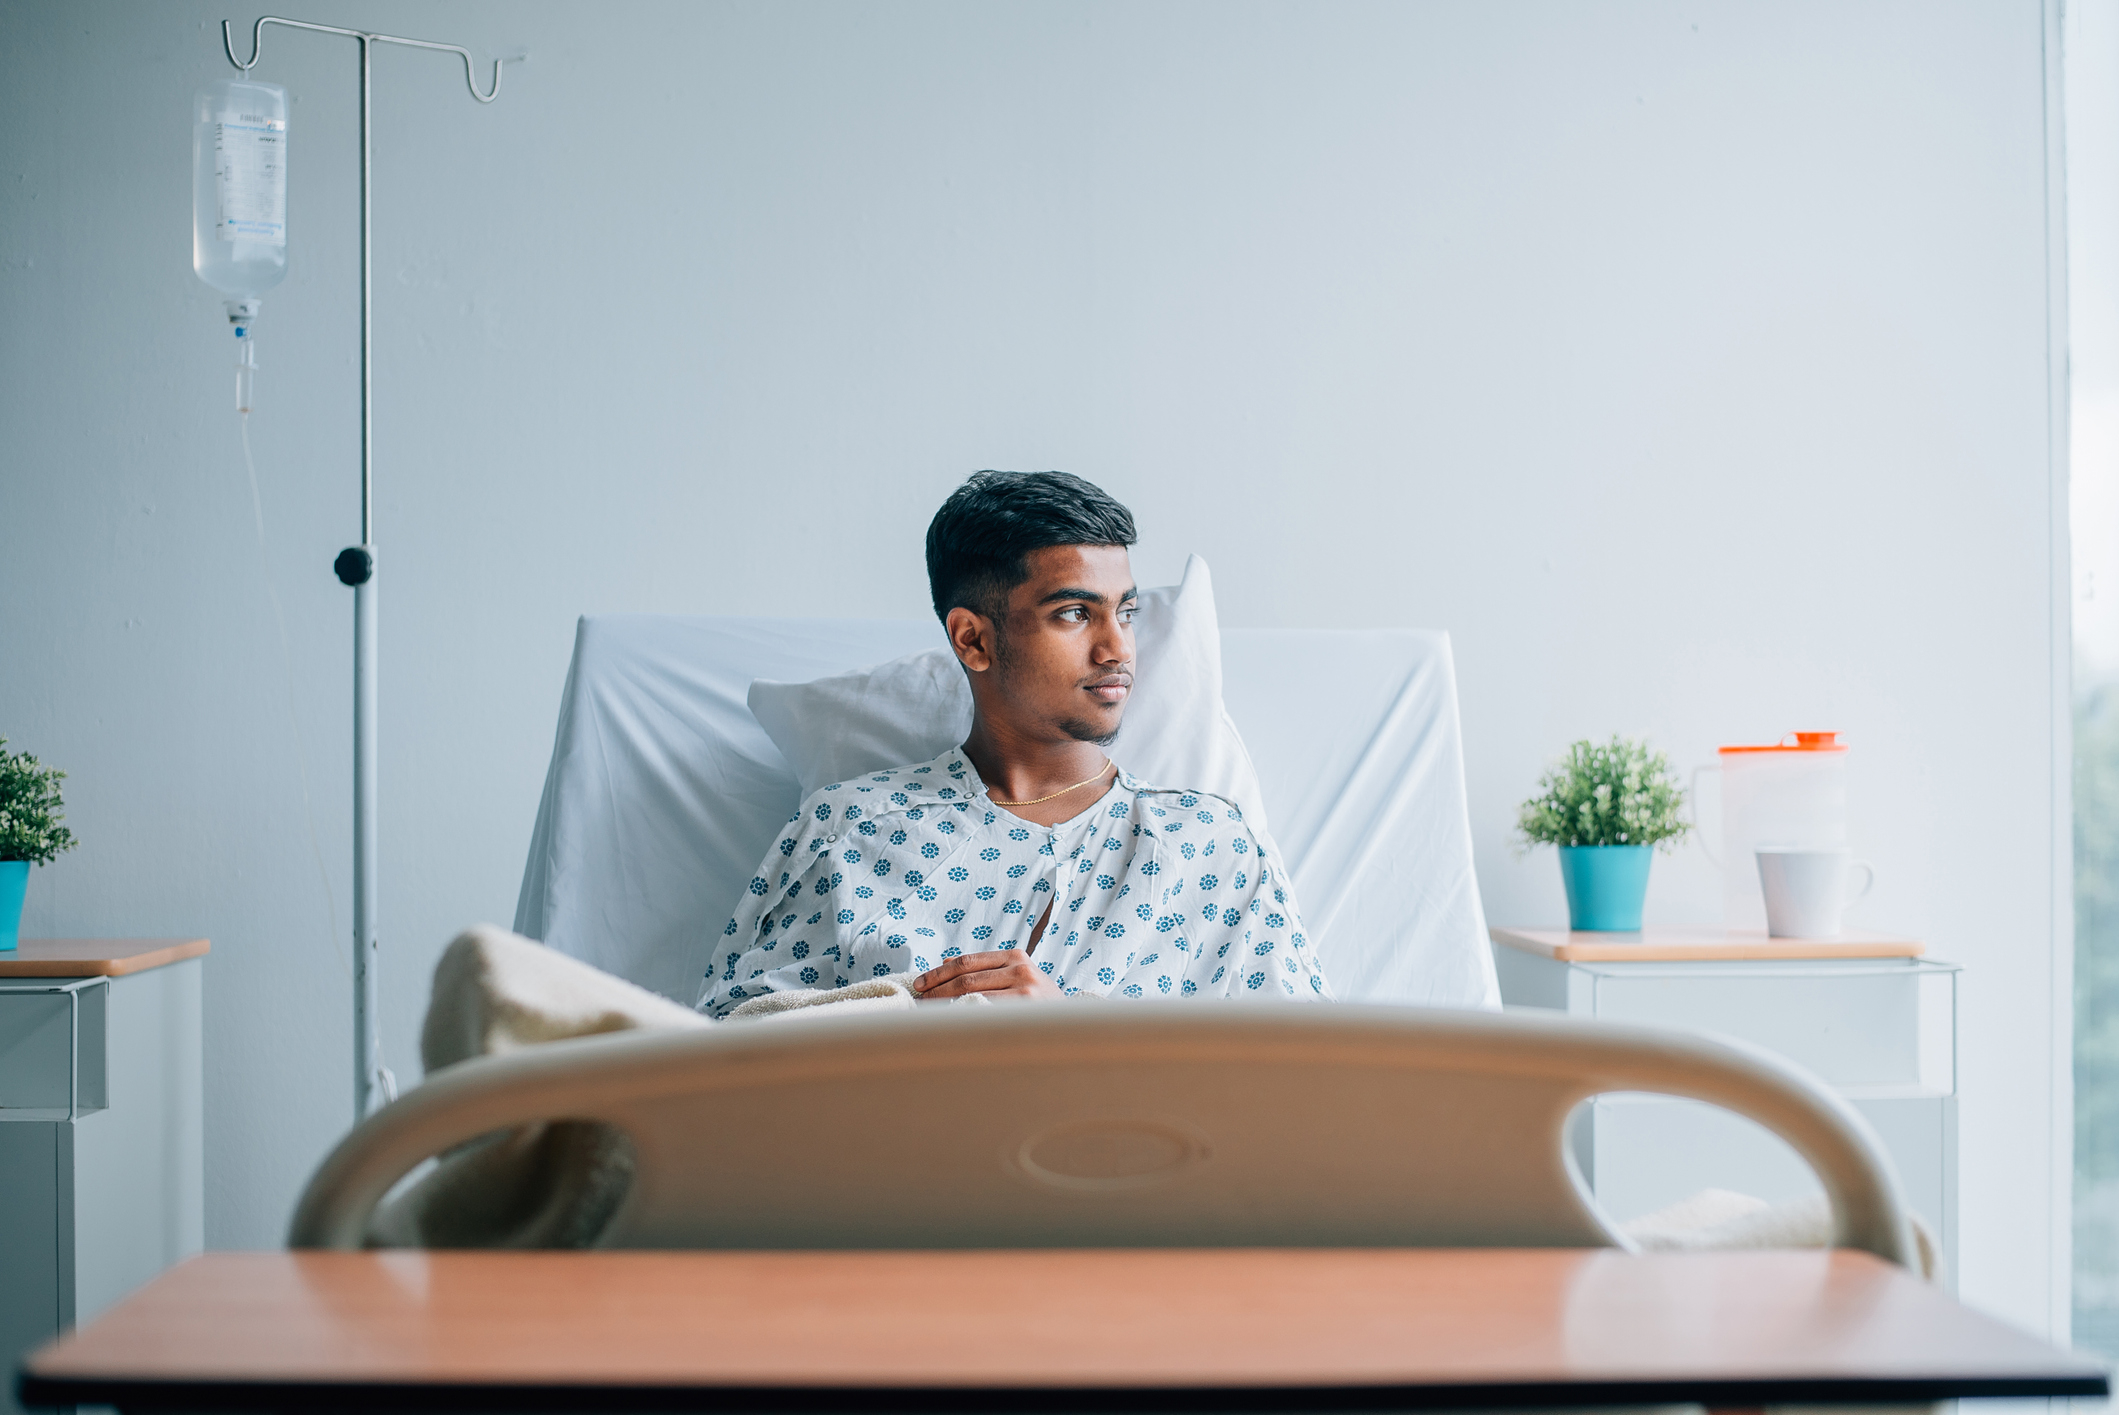 patient in a hospital bed